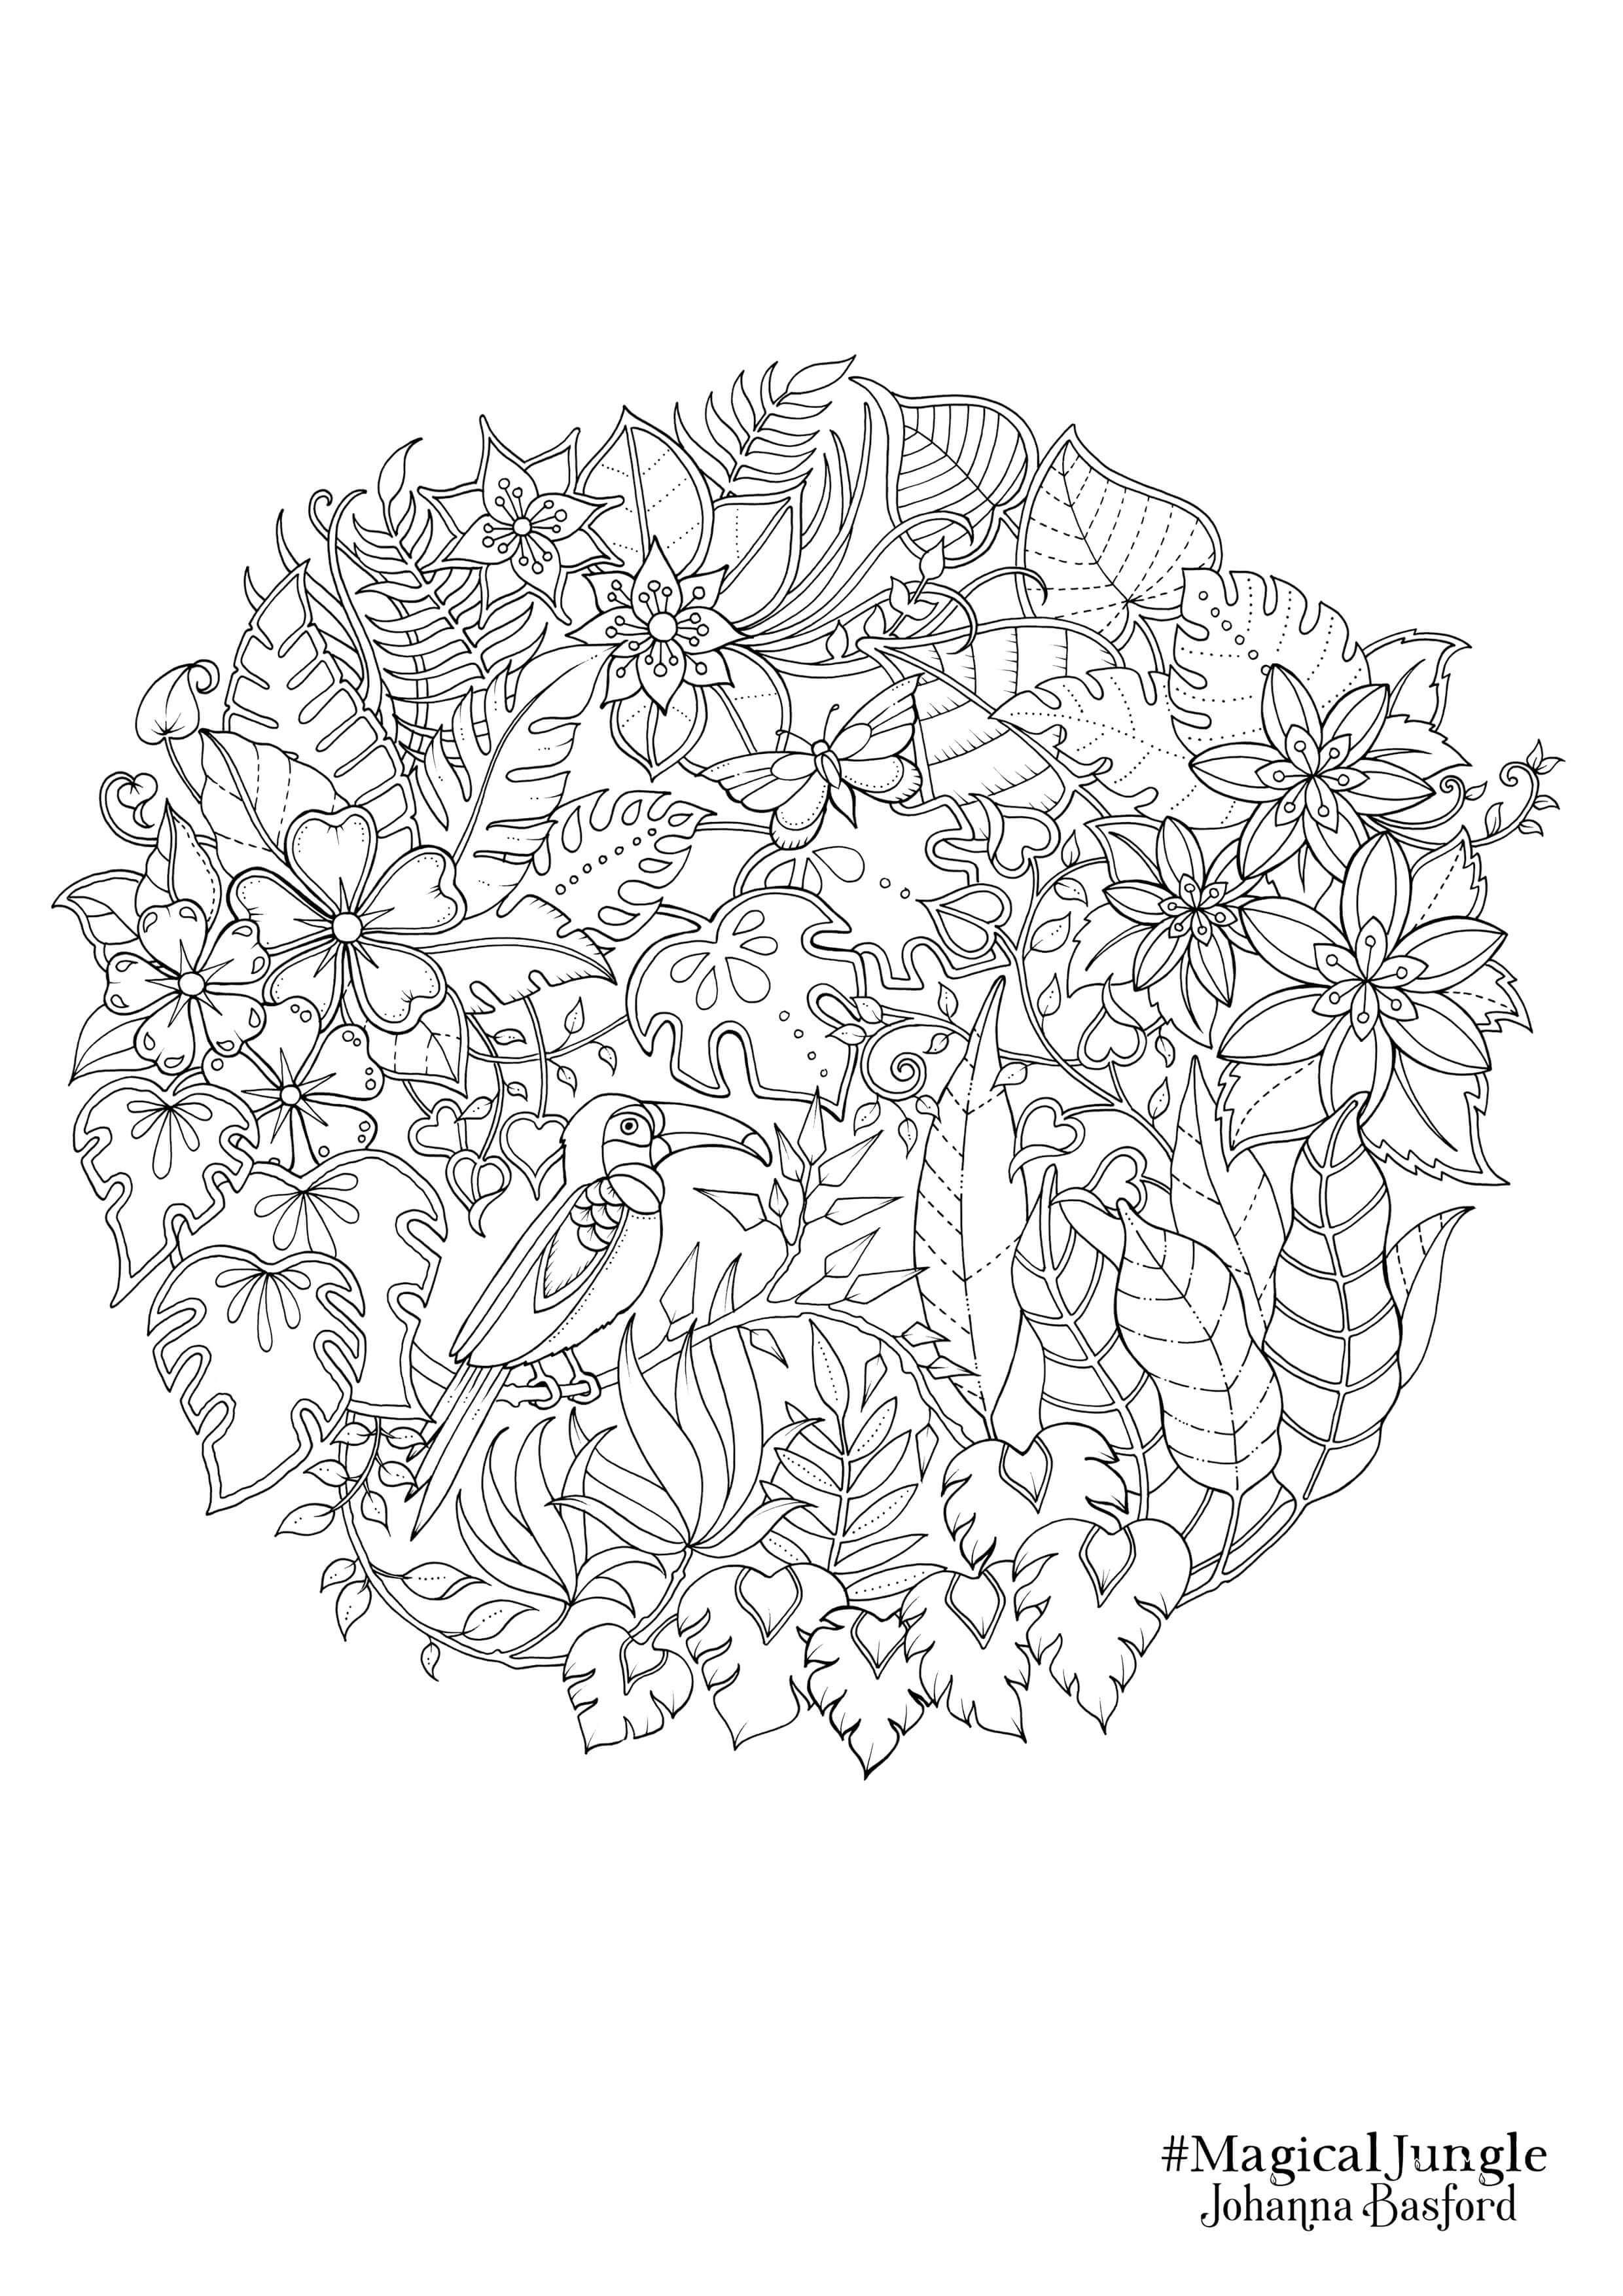 Magical Jungle Coloring Pages
 Afbeeldingsresultaat voor johanna basford magical jungle